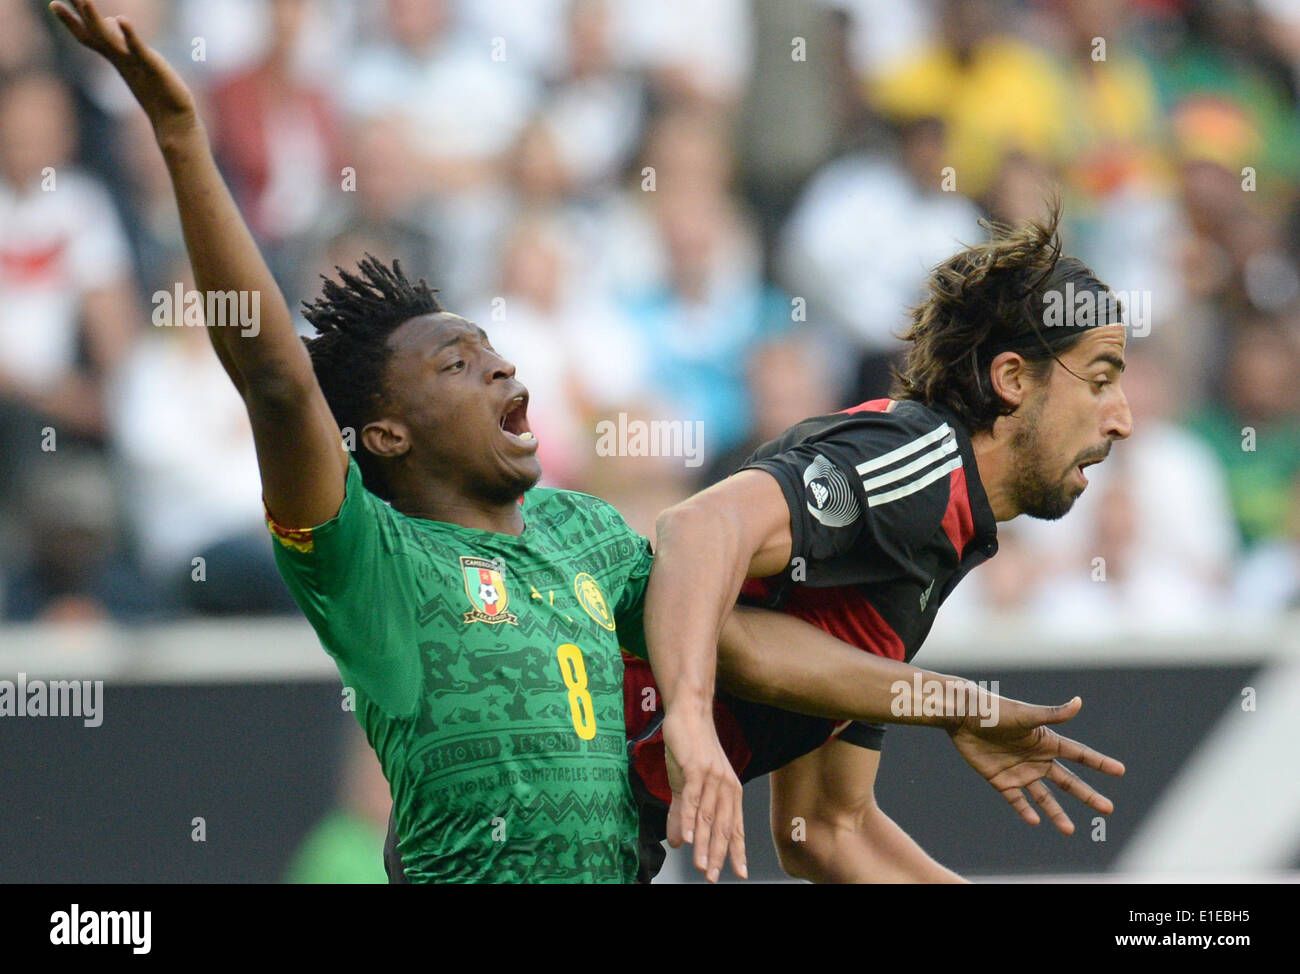 Moenchengladbach, Germany. 01st June, 2014. Germany's Sami Khedira (R) in action against Cameroon's Benjamin Moukandjo during the friendly soccer match between Germany and Cameroon at the Borussia Park stadium in Moenchengladbach, Germany, 01 June 2014. Photo: Bernd Thissen/dpa/Alamy Live News Stock Photo